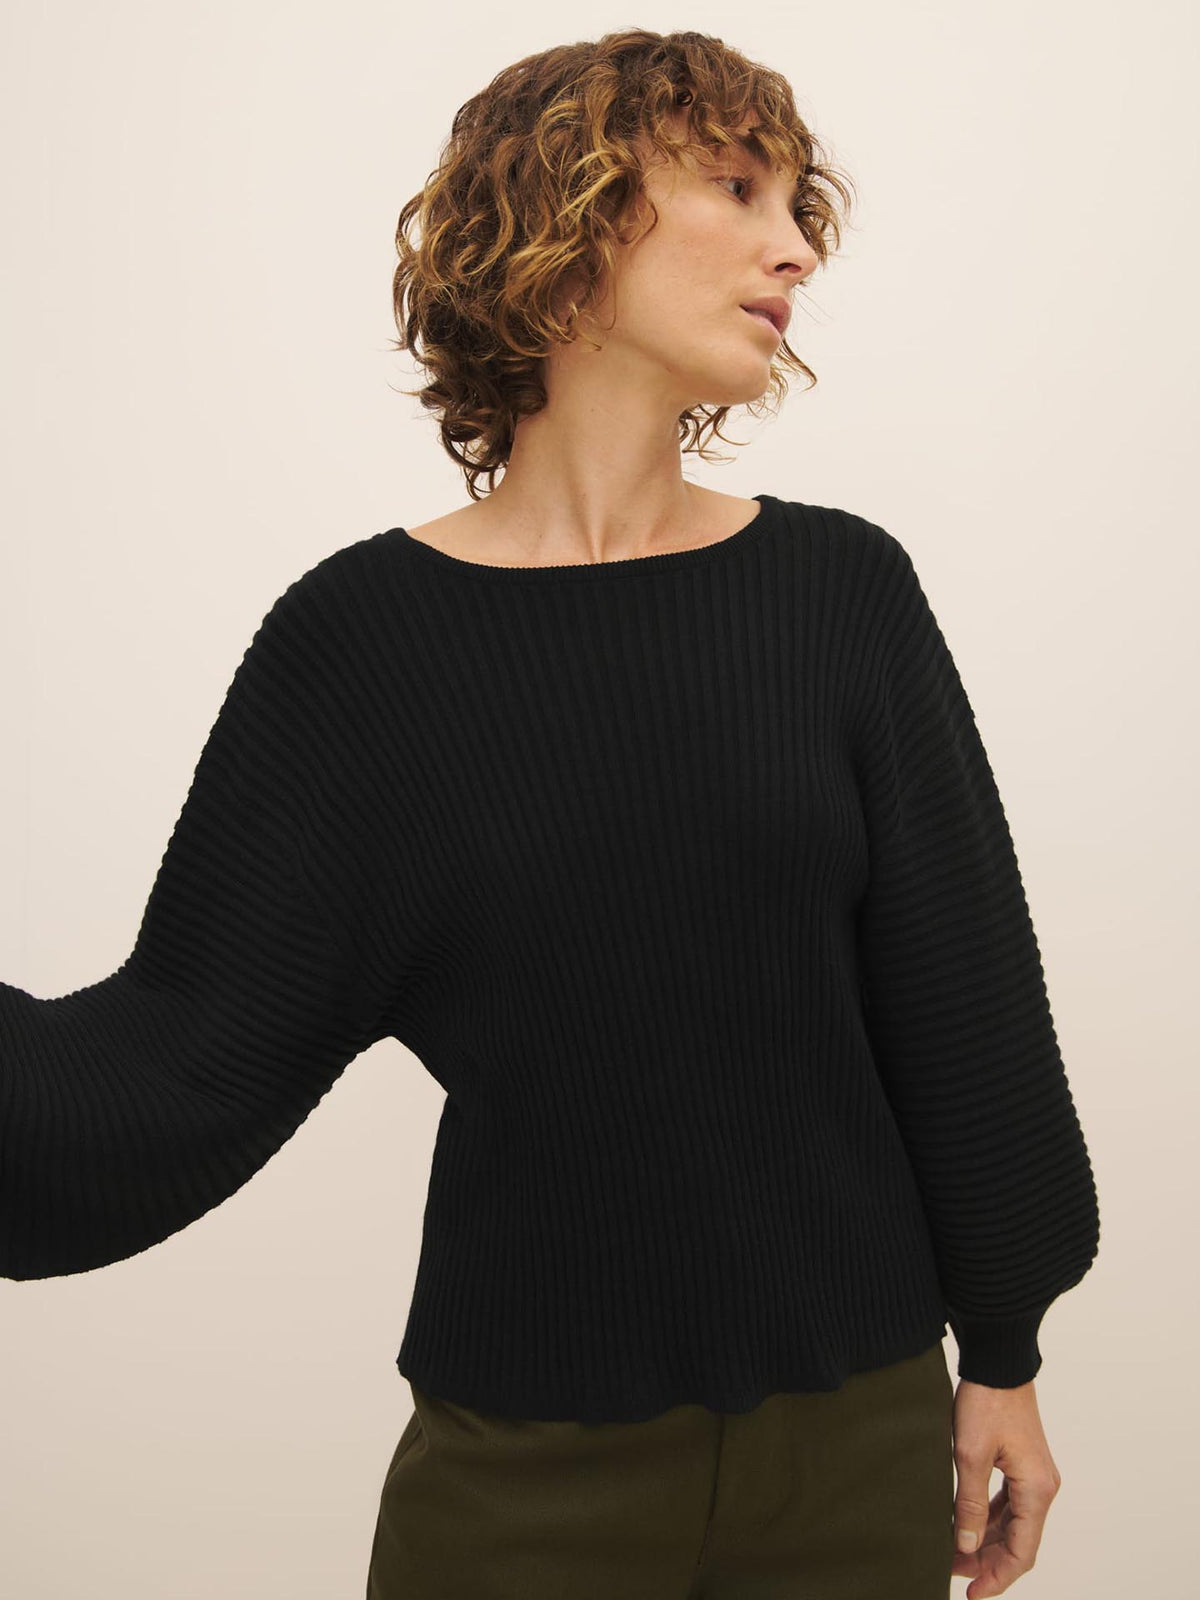 Woman in a black Cassia Sweater – Black made from Fairtrade organic cotton, looking to the side against a neutral background by Kowtow.